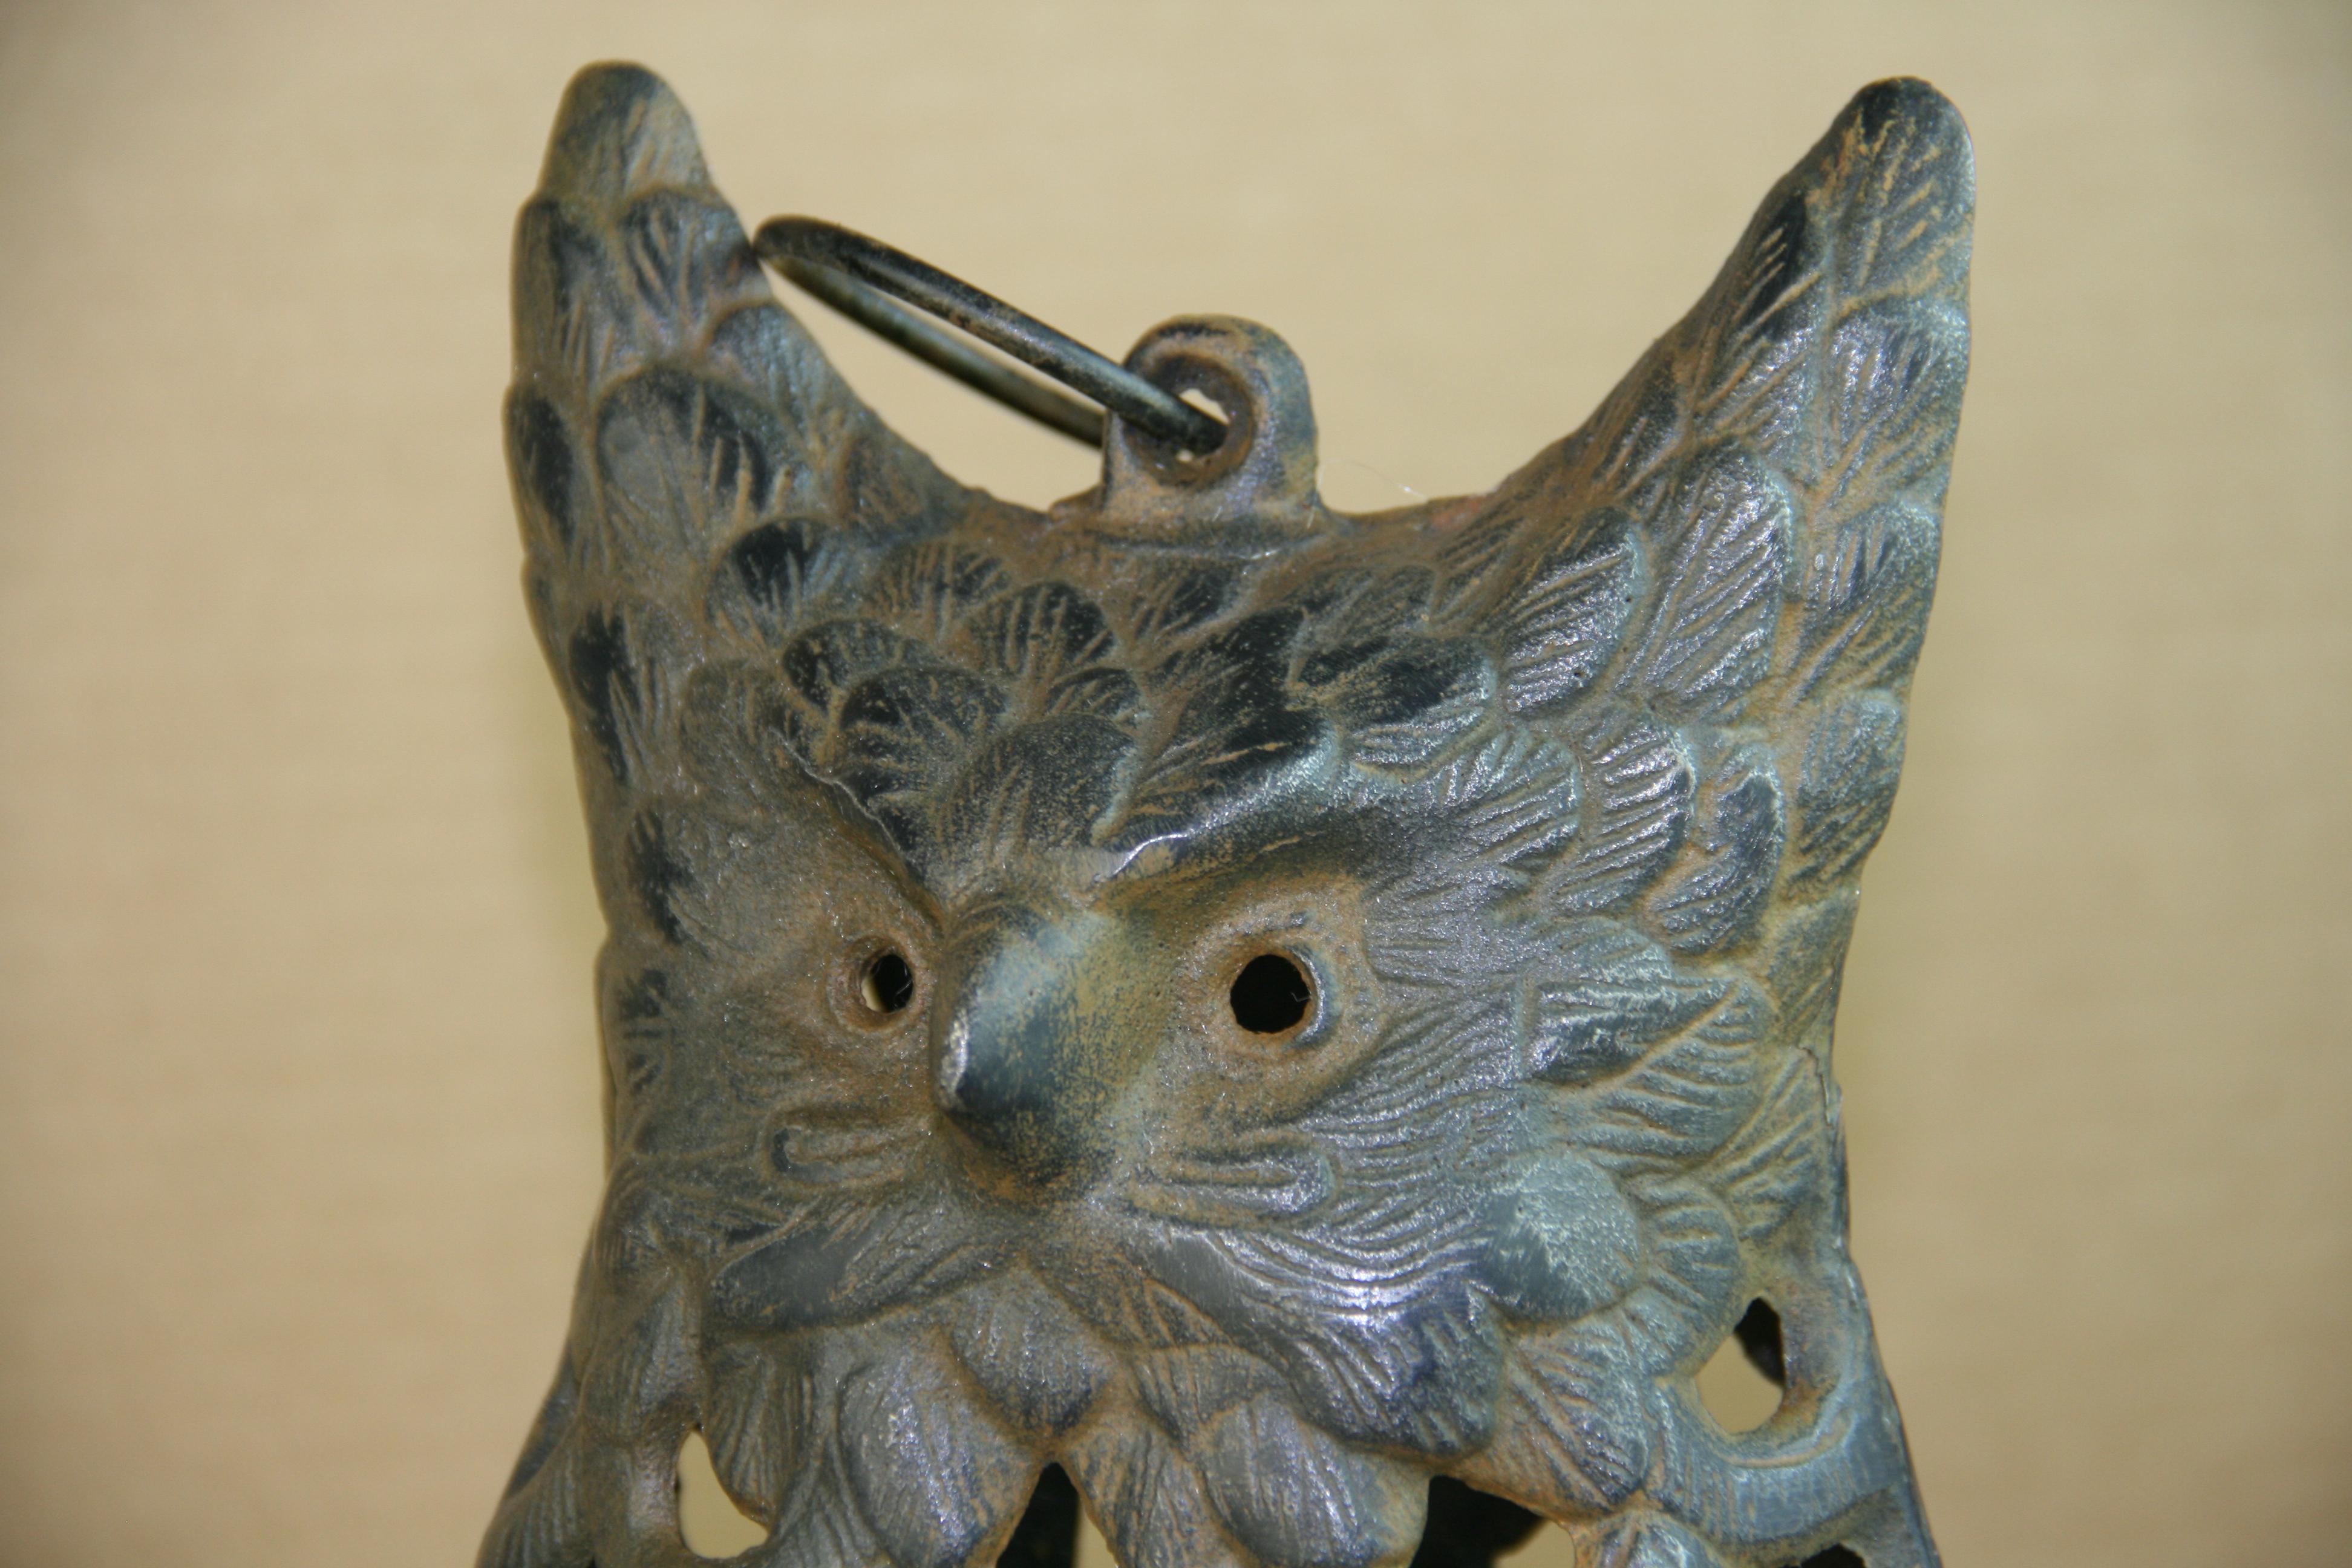 Japanese Rare Oversized Owl Garden Candle Lantern with Antique Chain For Sale 2